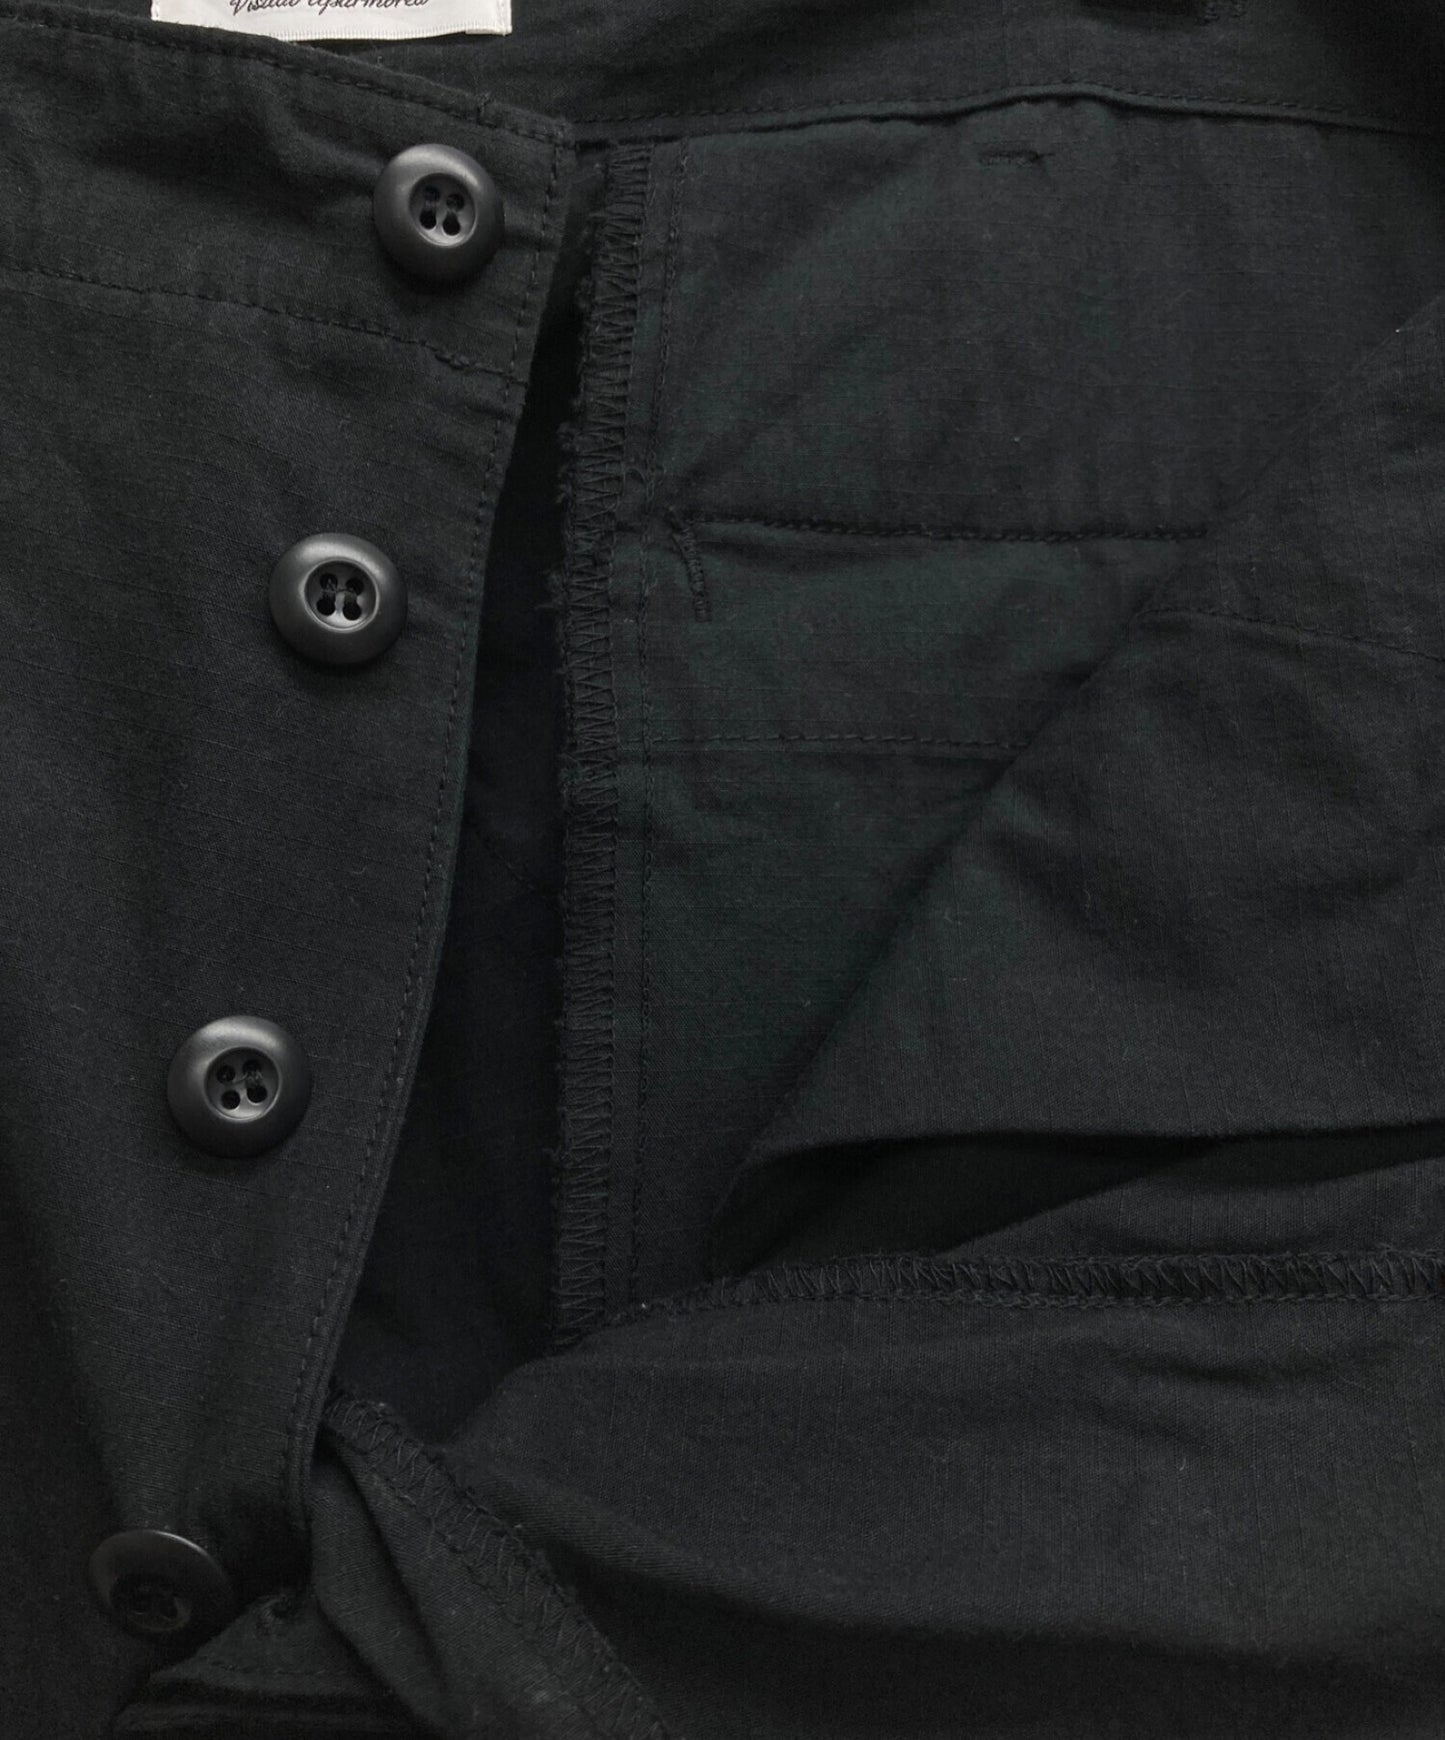 [Pre-owned] WTAPS Back Satin Cargo Trouser Pants WVDT-PTM01